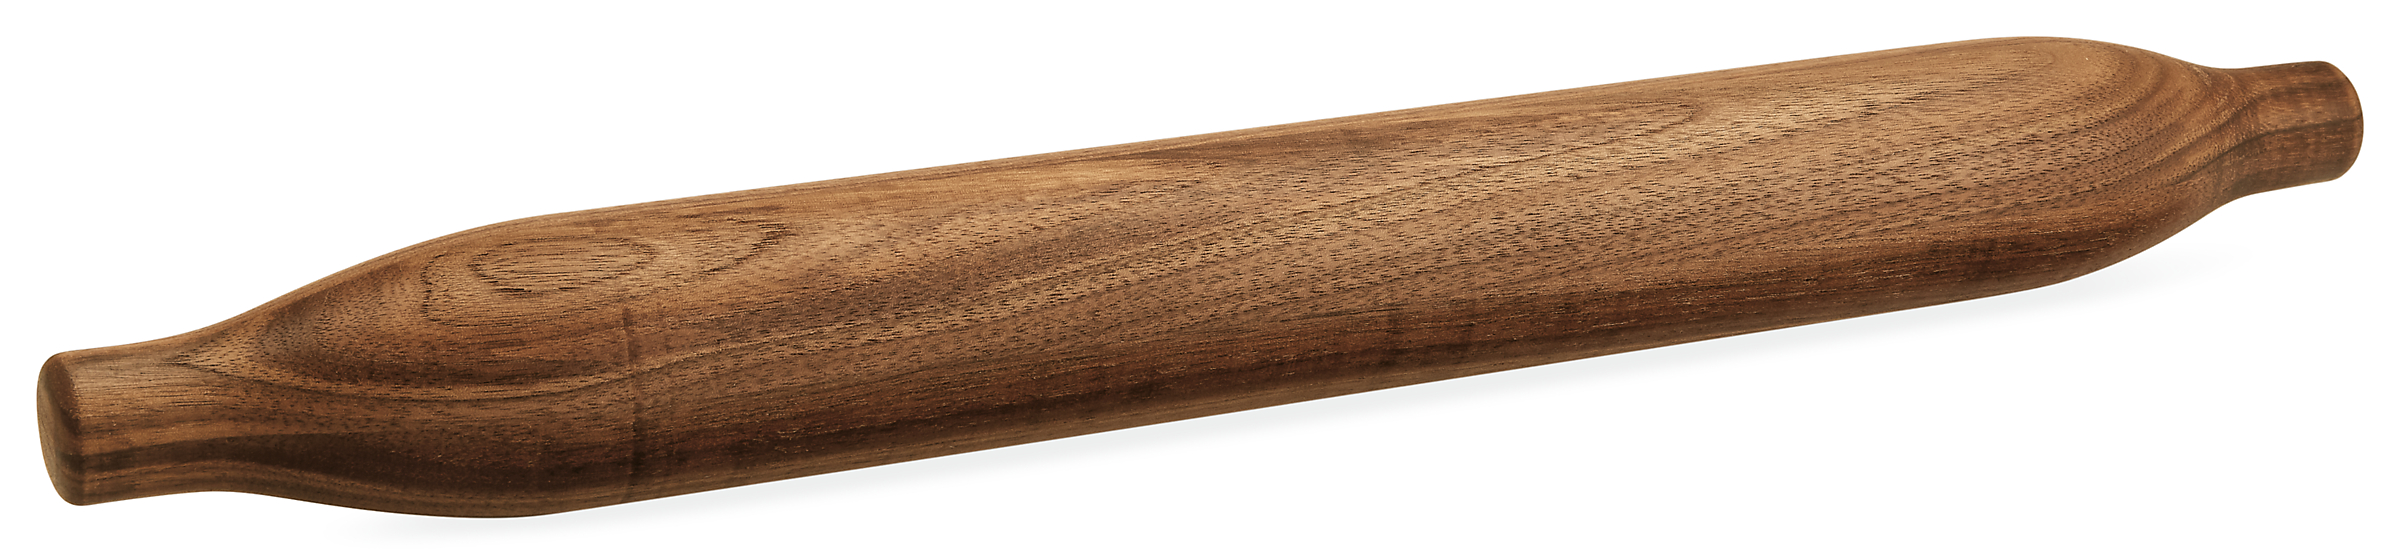 Provision Rolling Pin 20w